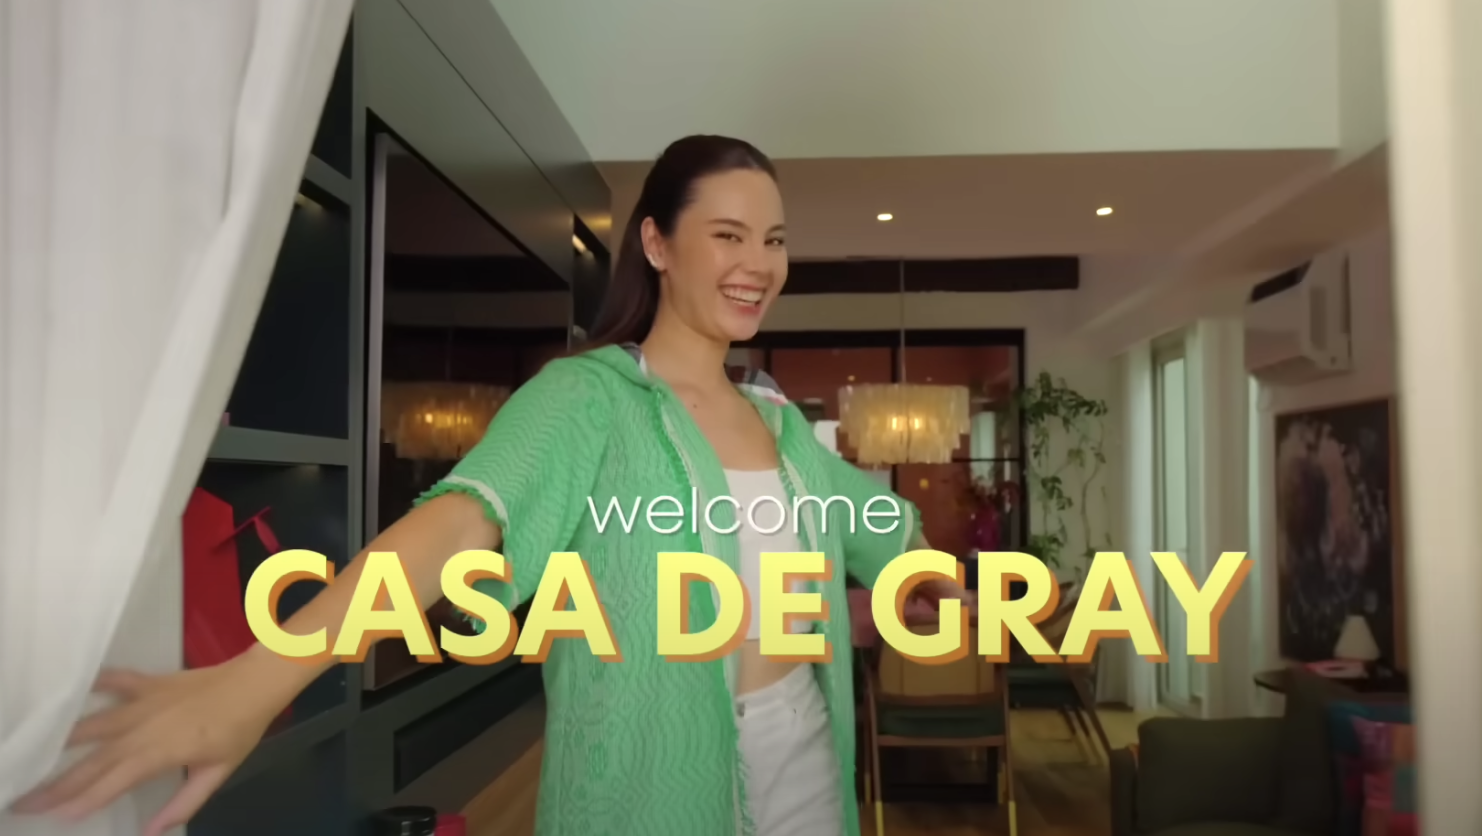 Catriona Xxx Video - Catriona Gray gives tour of her first home | GMA News Online